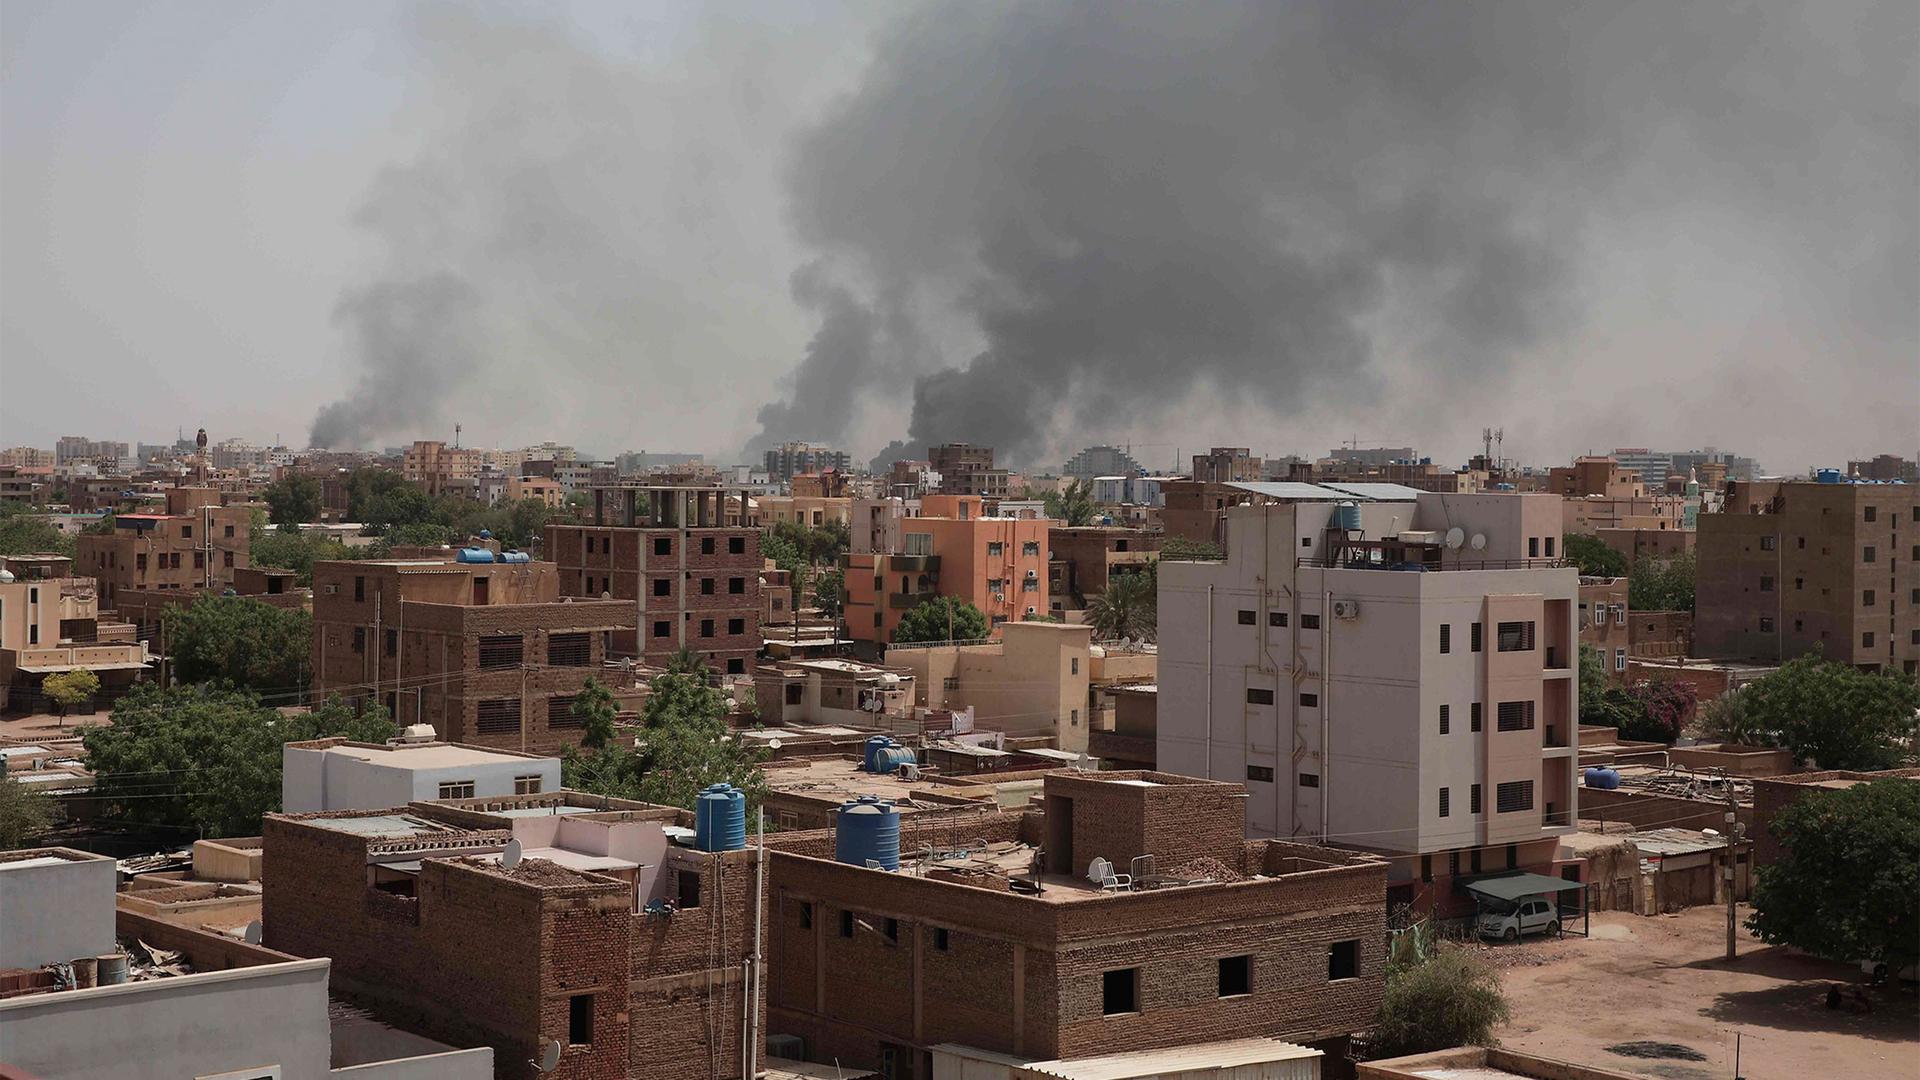 Smoke rises from a central neighborhood of Khartoum, Sudan, amid intense fighting between armed forces, April 16, 2023.